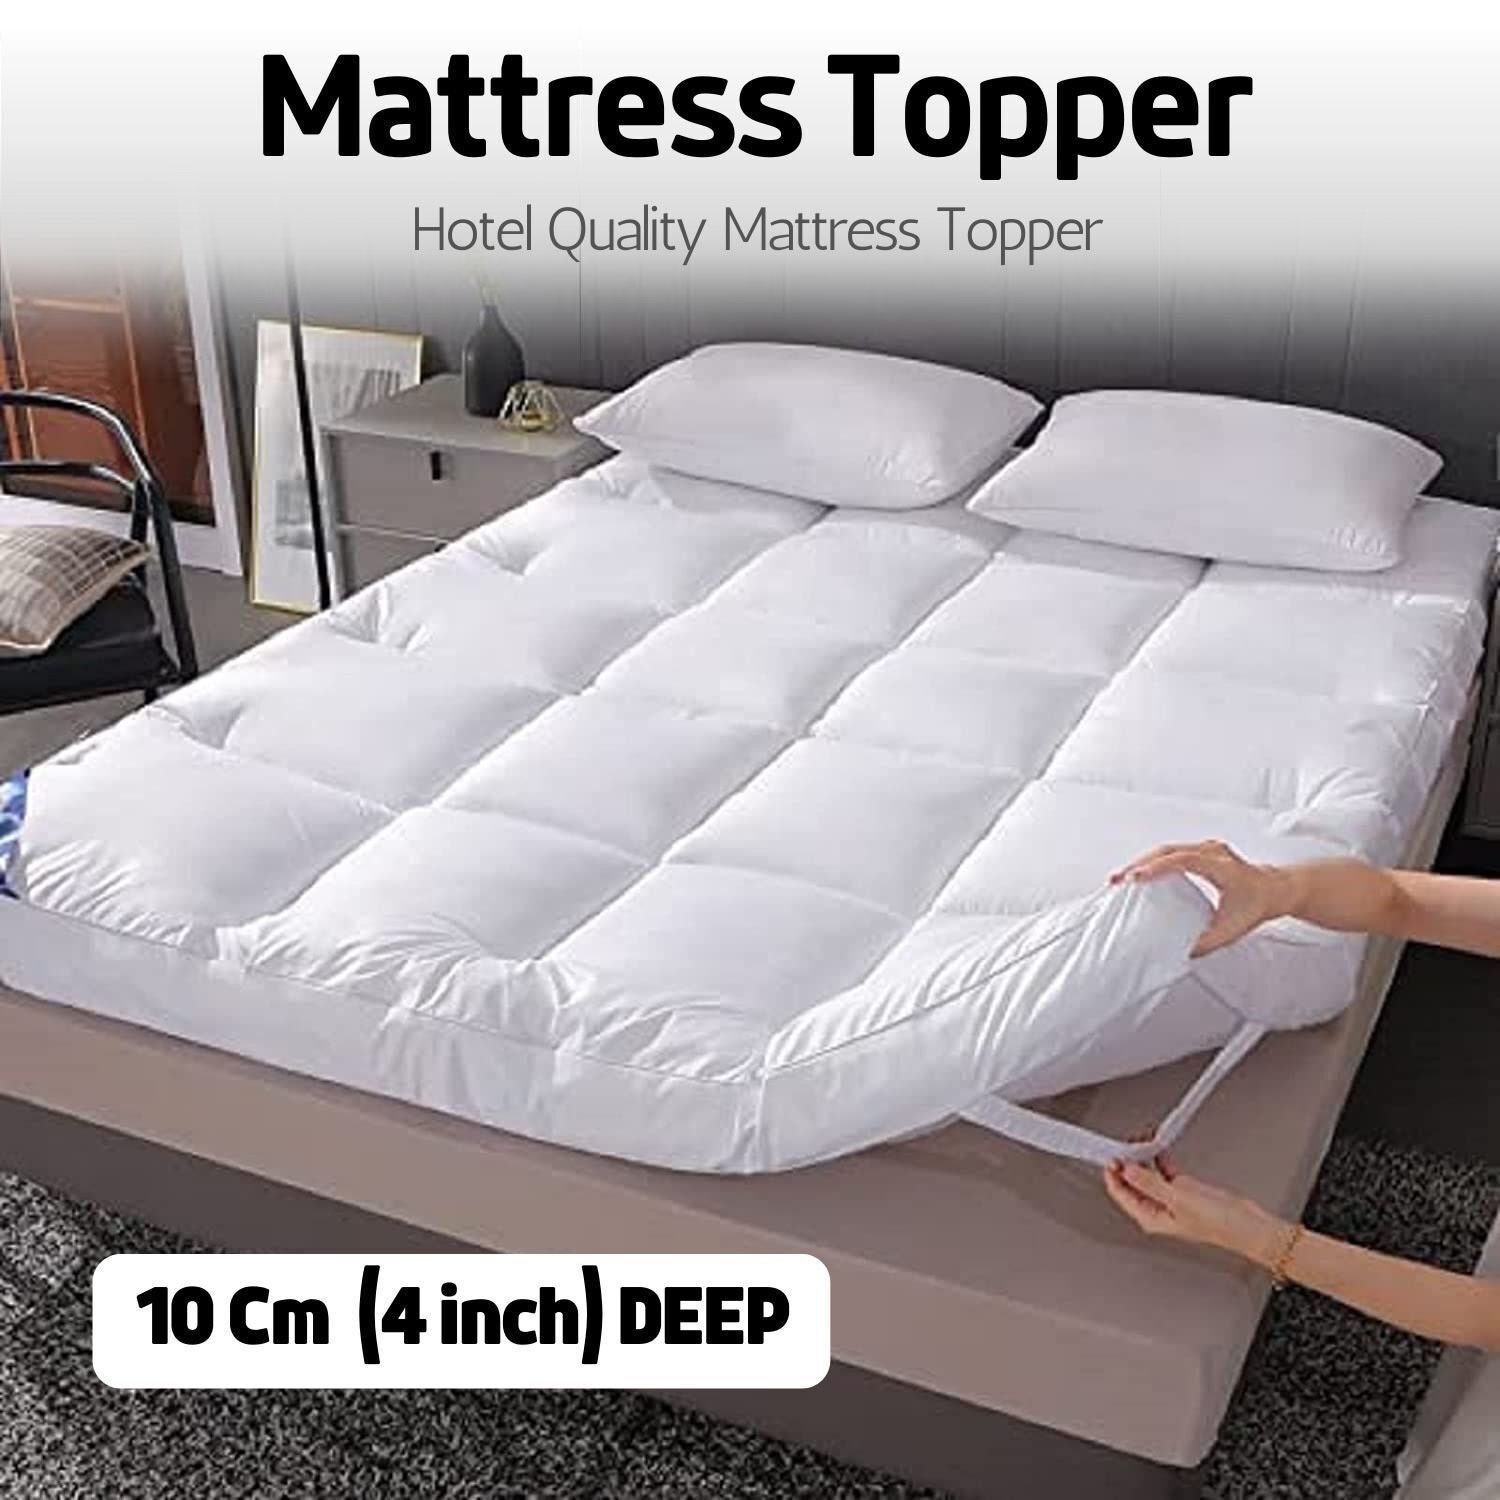 10cm Deep Hotel Quality Mattress Topper Thick Single Double King Super UK  SIZES